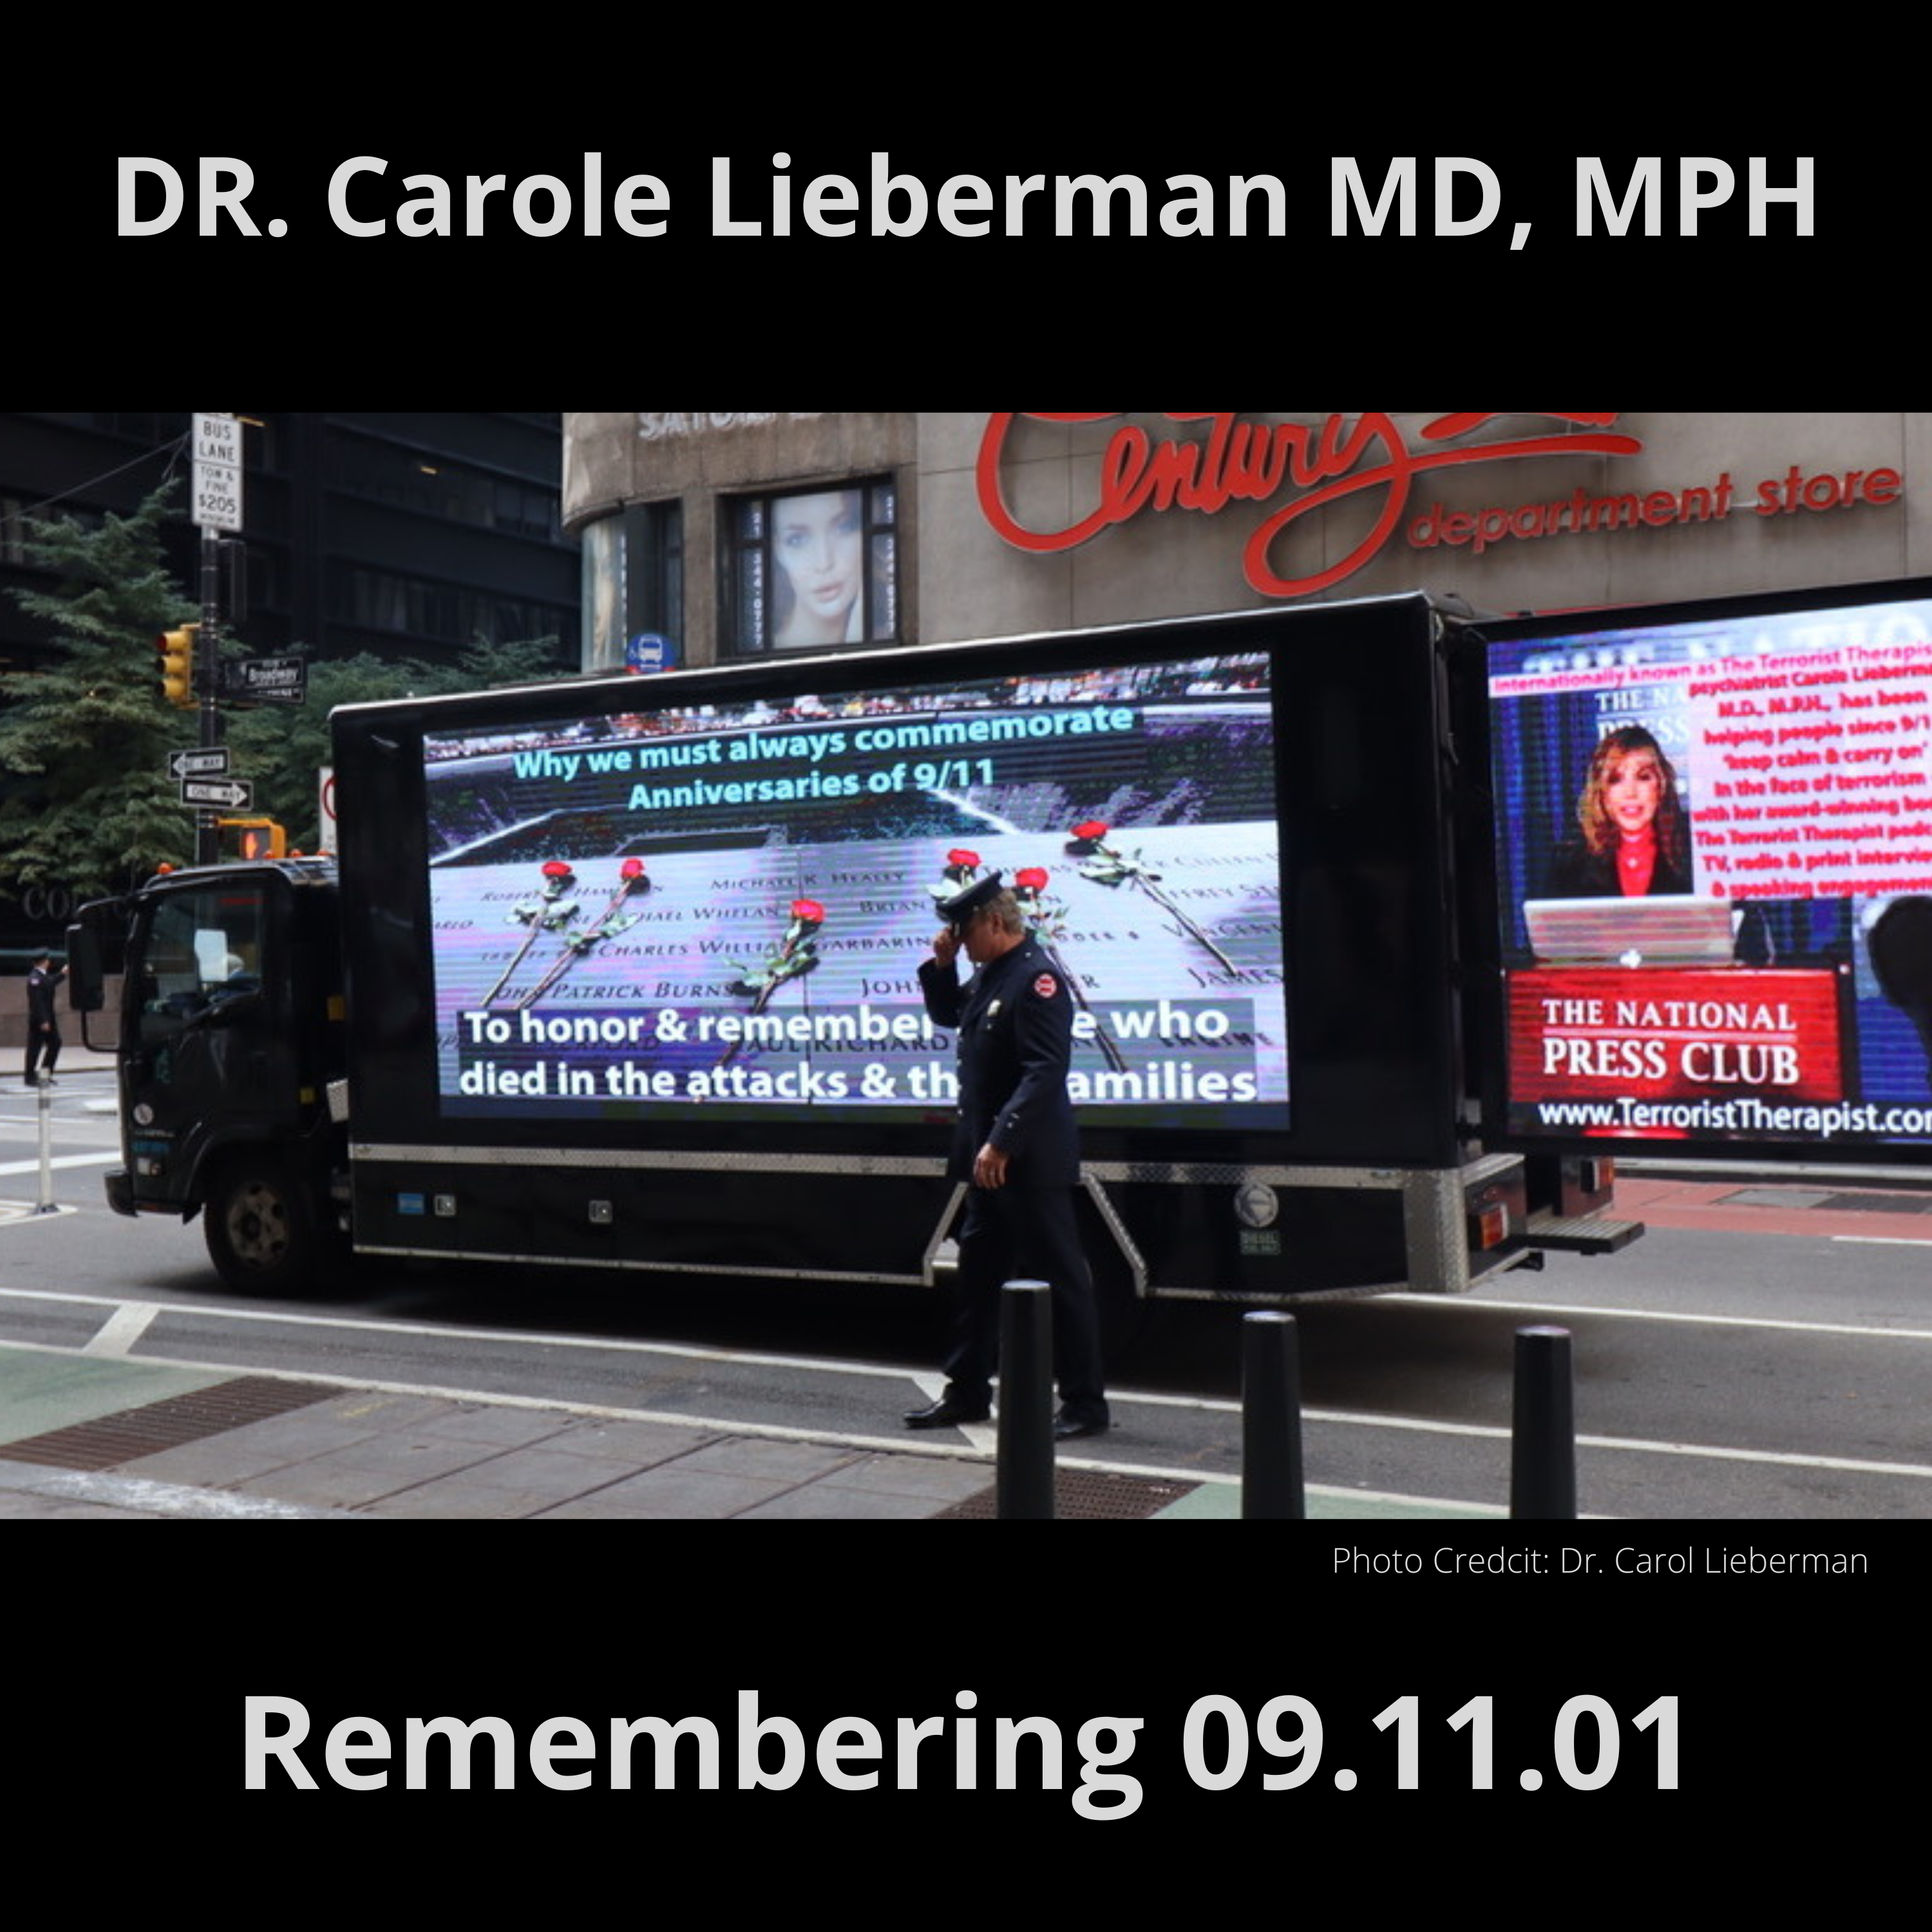 September 11, 2001 Tribute: Featuring Dr. Carole Lieberman MD, MPH